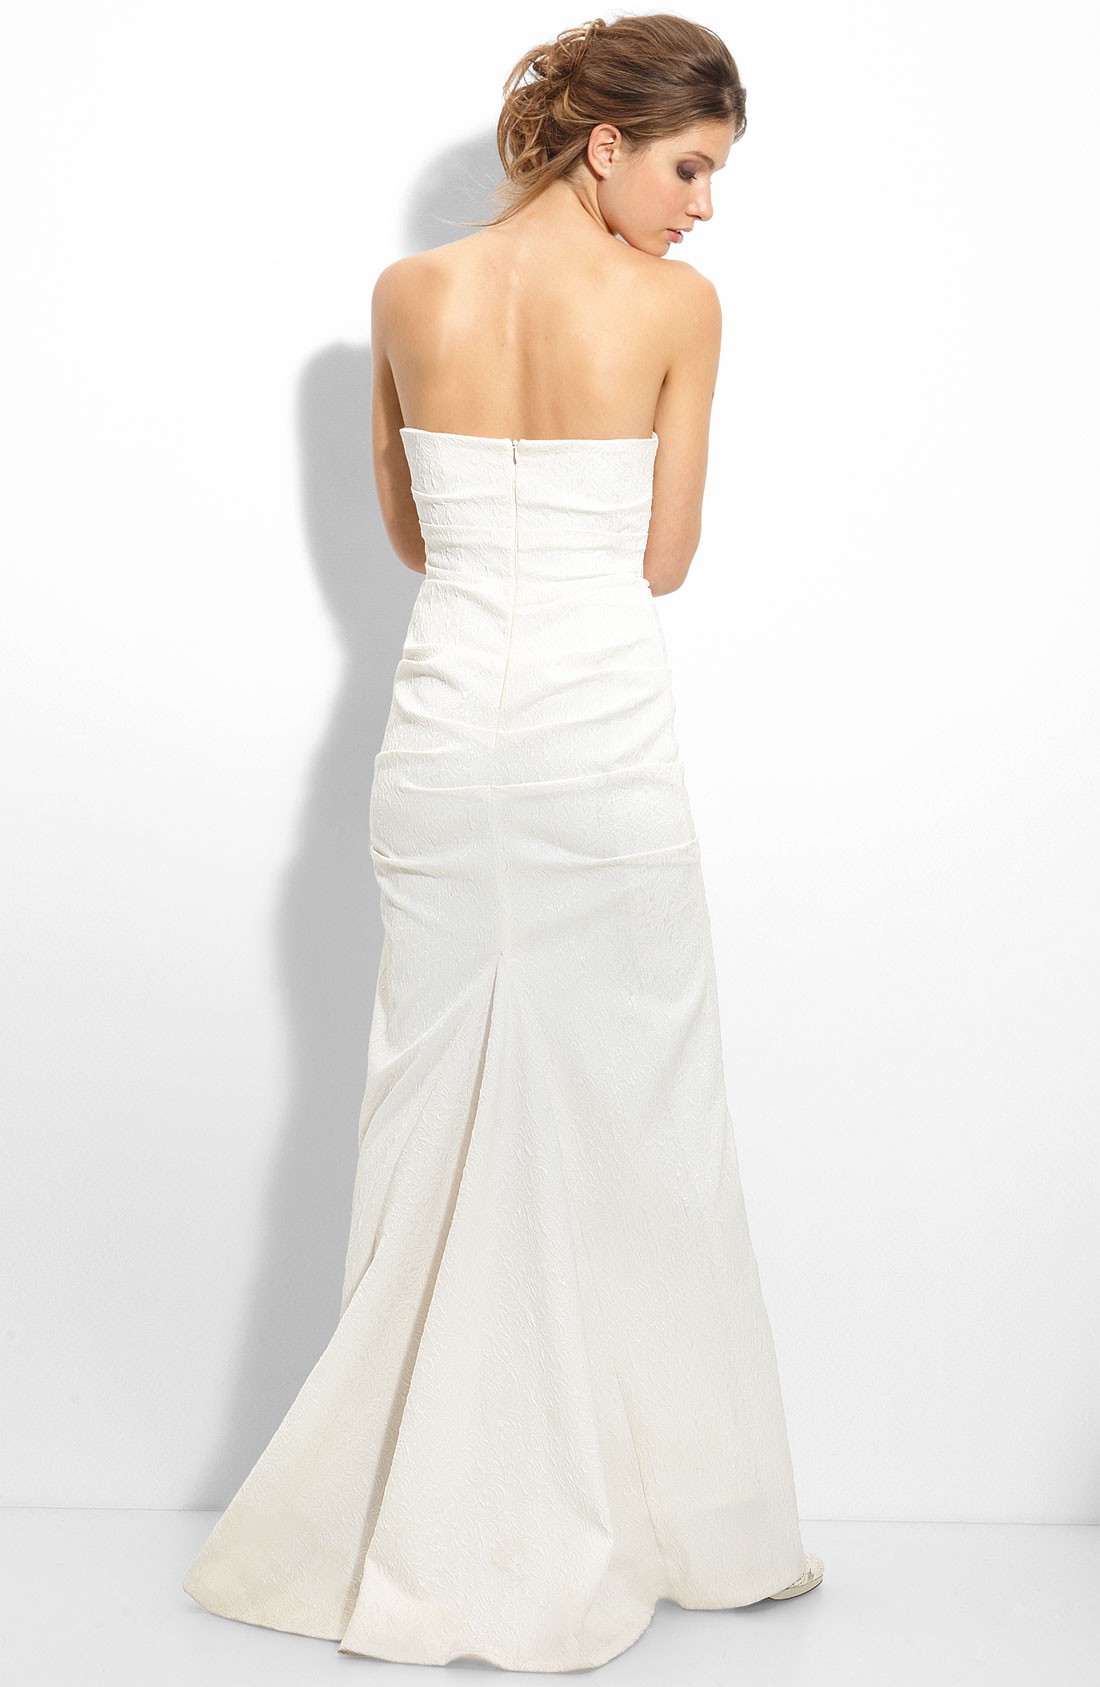 Nicole Miller Pintucked Jacquard Fishtail Gown New Wedding Dress ...